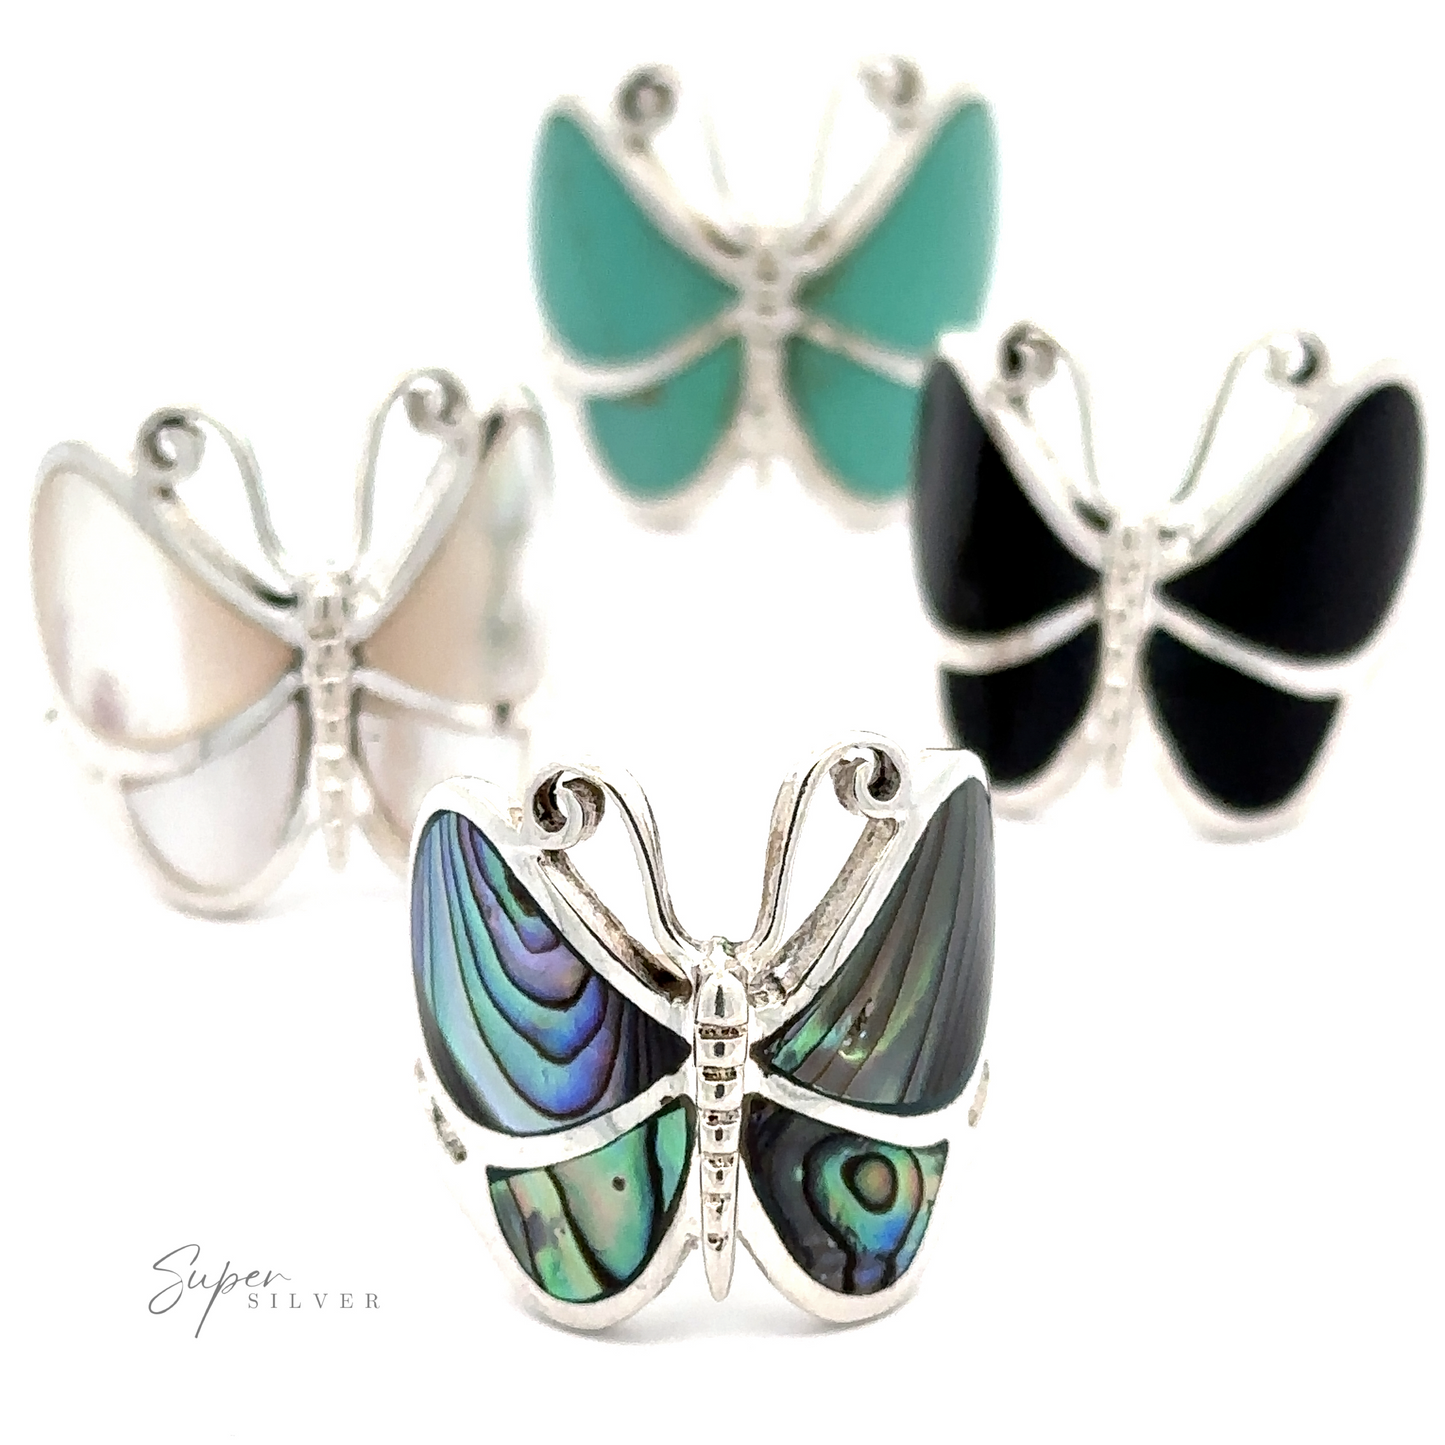 Three Bold Butterfly Rings with Inlaid Stones crafted from sterling silver with inlays in pastel blue, black, and iridescent green displayed against a white background.